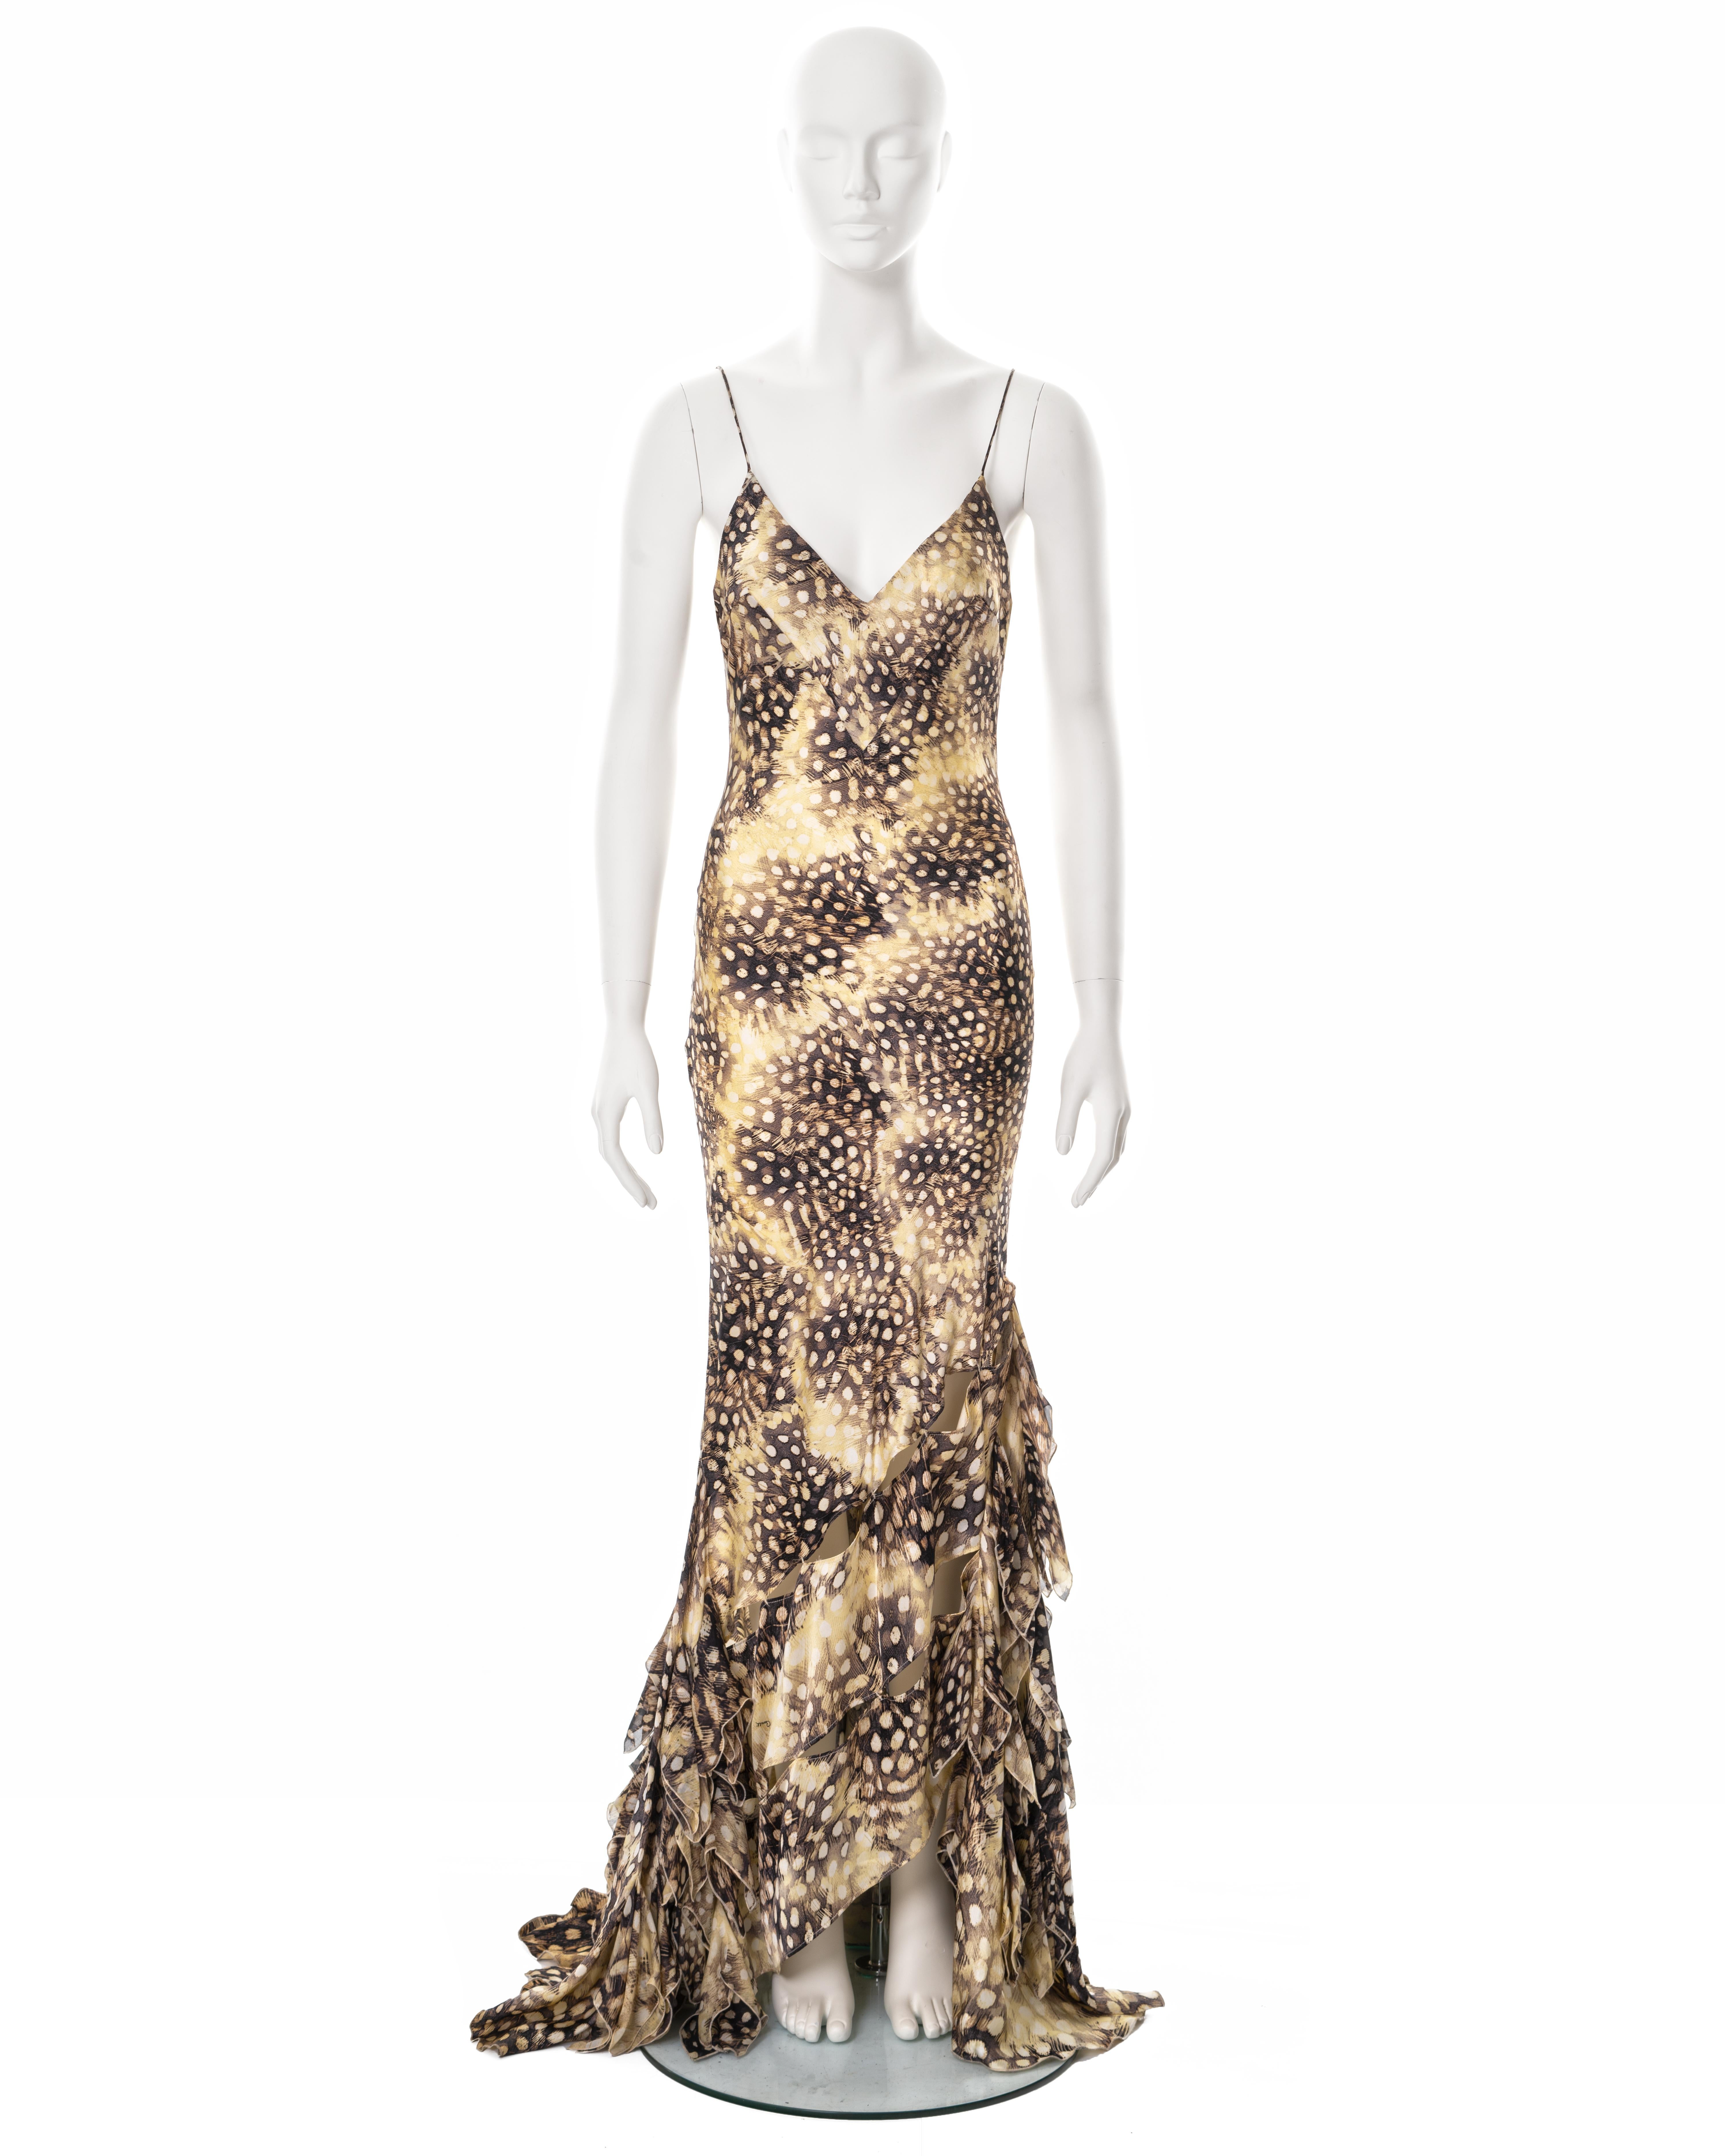 ▪ Roberto Cavalli evening dress
▪ Sold by One of a Kind Archive
▪ Spring-Summer 2004
▪ Constructed from feather-printed bias-cut silk 
▪ V-neck
▪ Spaghetti straps 
▪ Floor-length skirt with train 
▪ Multiple open seams on the skirt bare the skin of